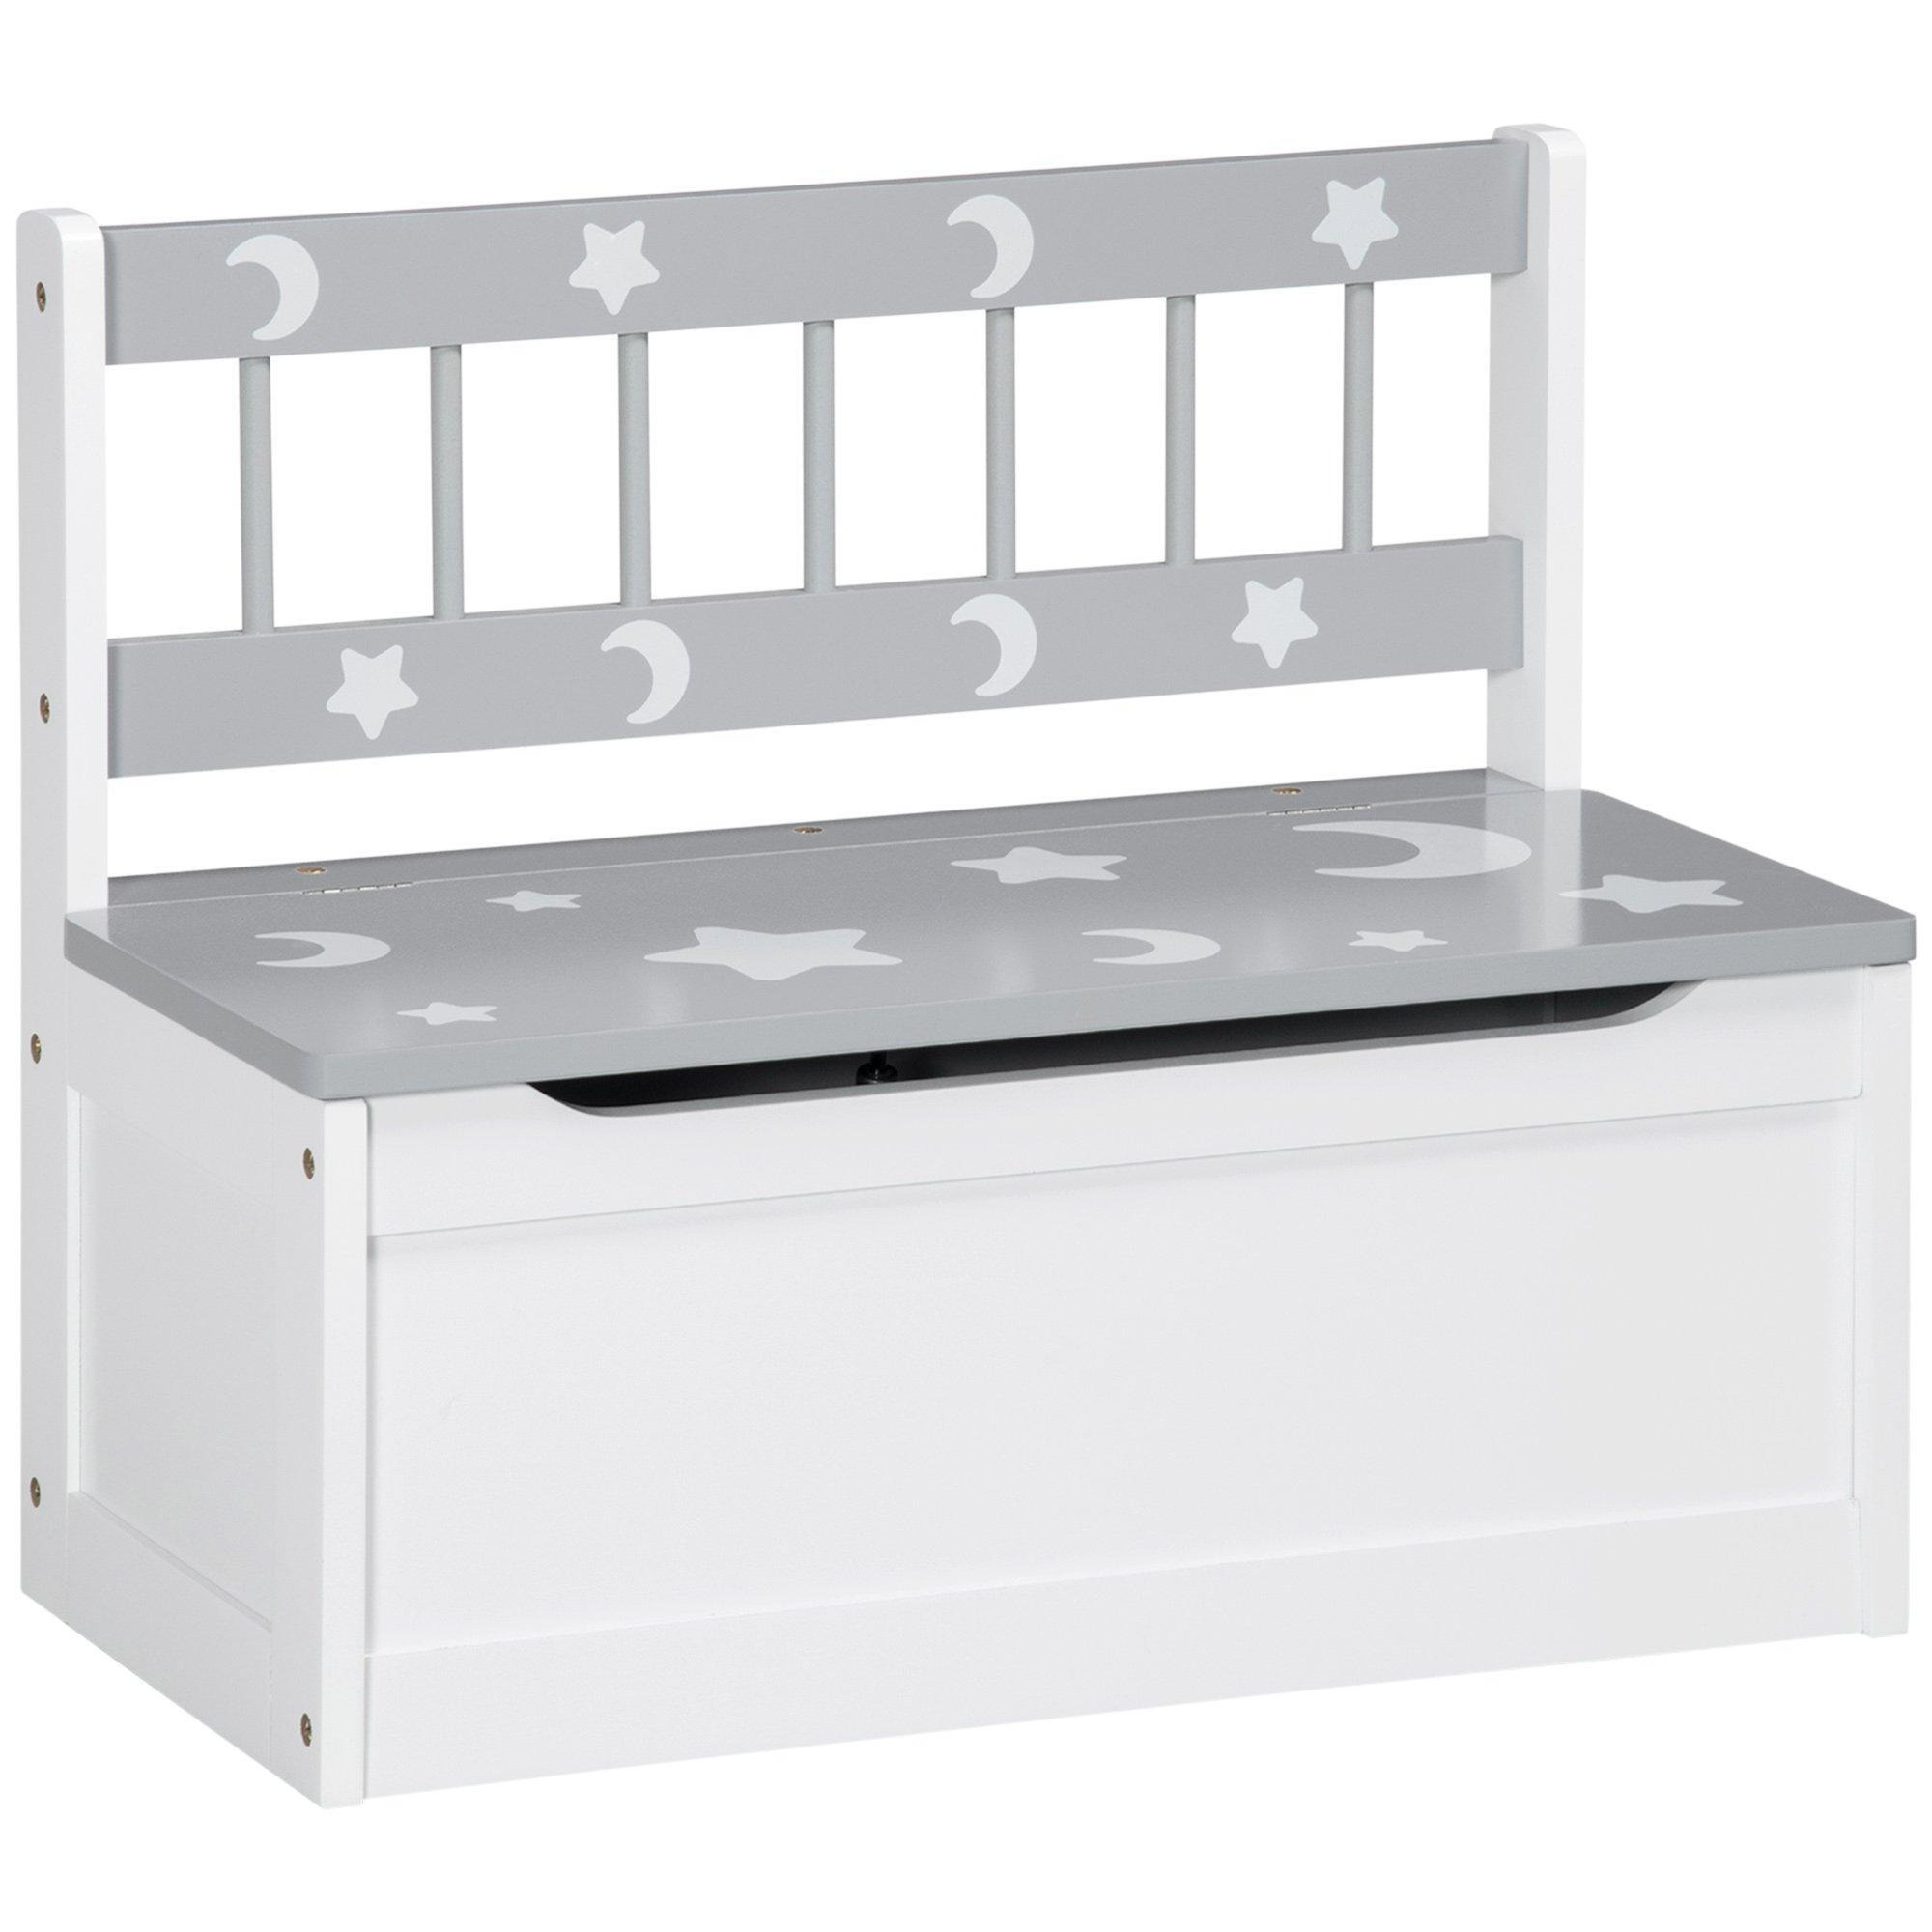 2 In 1 Wooden Toy Box, Kids Storage Bench with Safety Rod - Grey - image 1